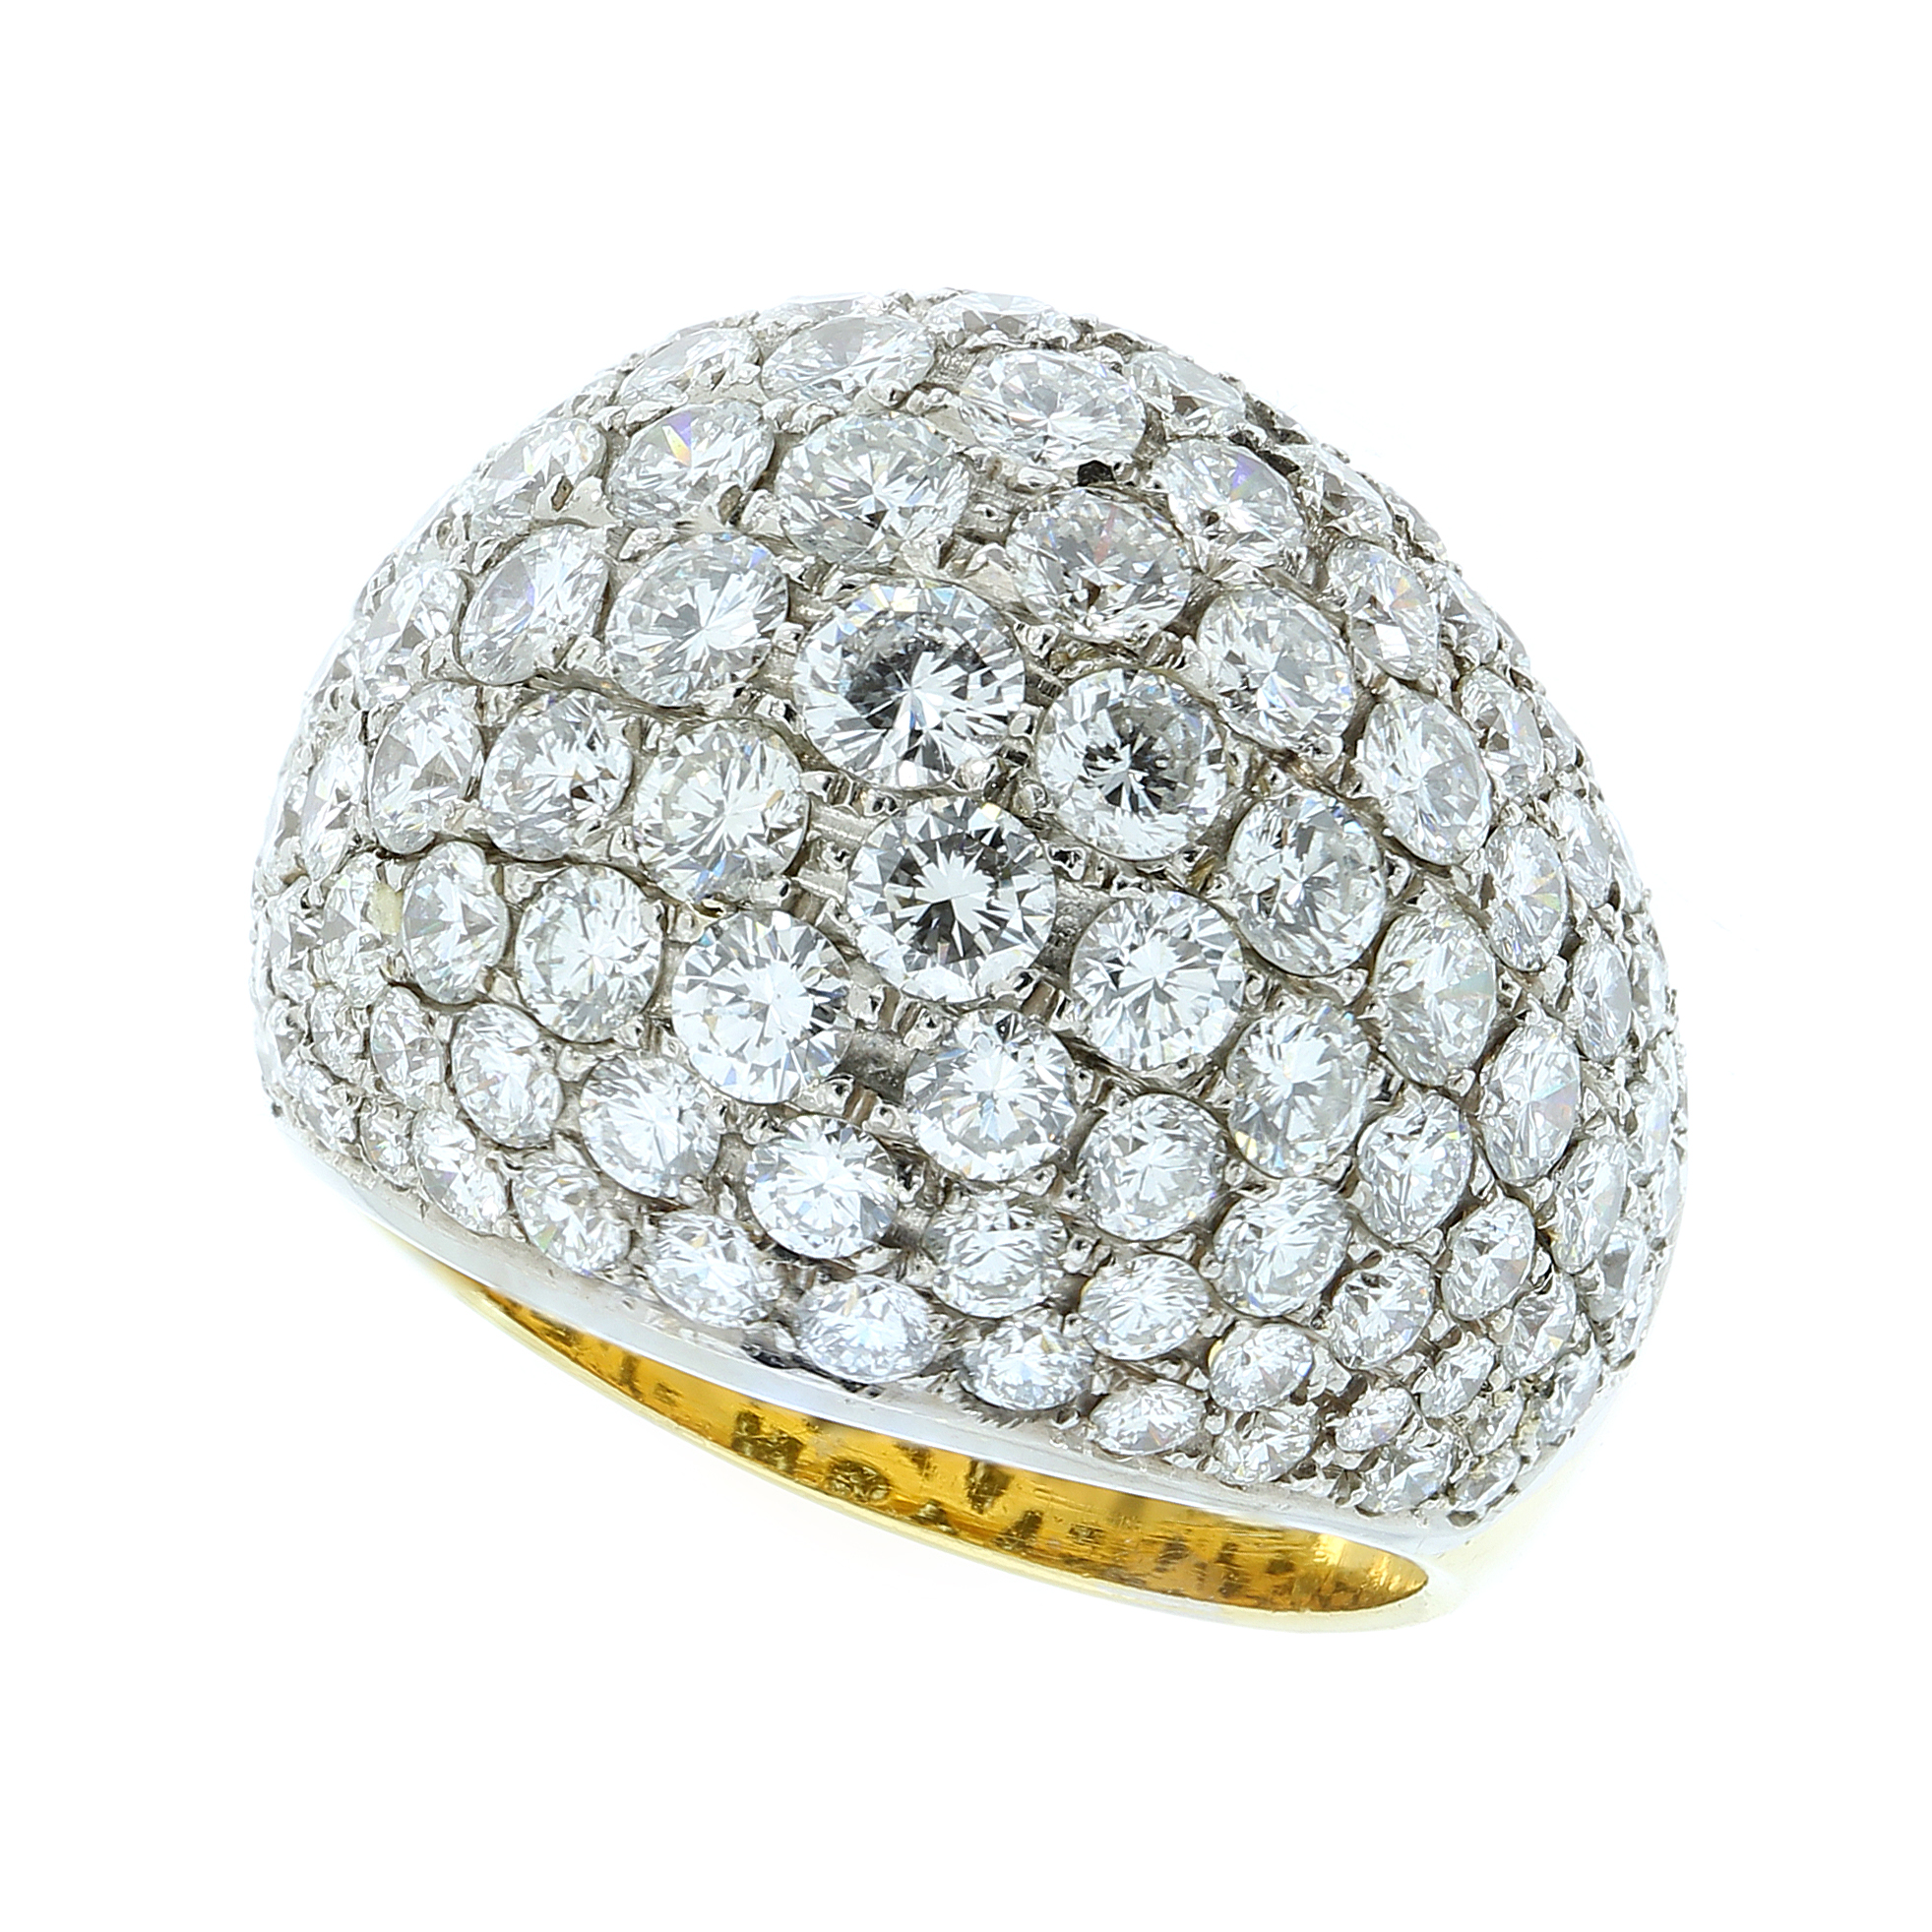 A DIAMOND BOMBE DRESS RING in 18ct yellow gold, the large domed top jewelled all over with round cut